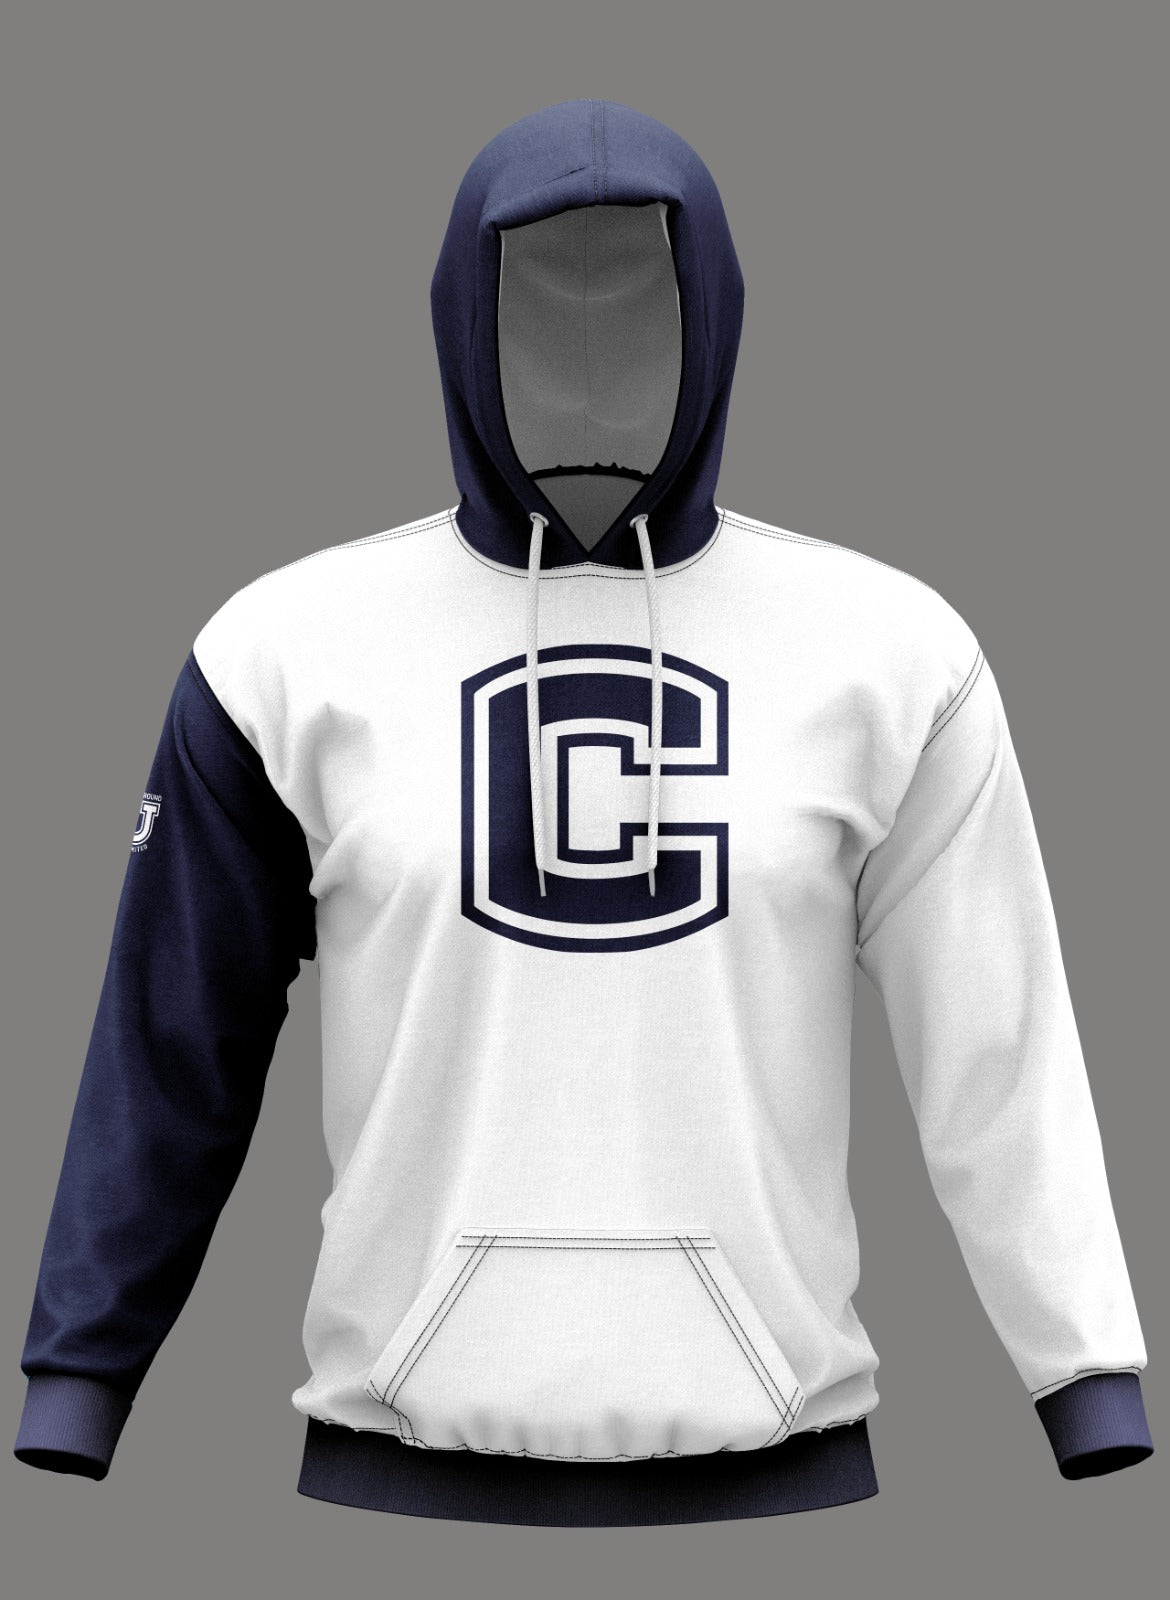 W.T. Chipman Performance Hoodie ~ White ALT Sleeve C Central Chest "Home of the Spartans"